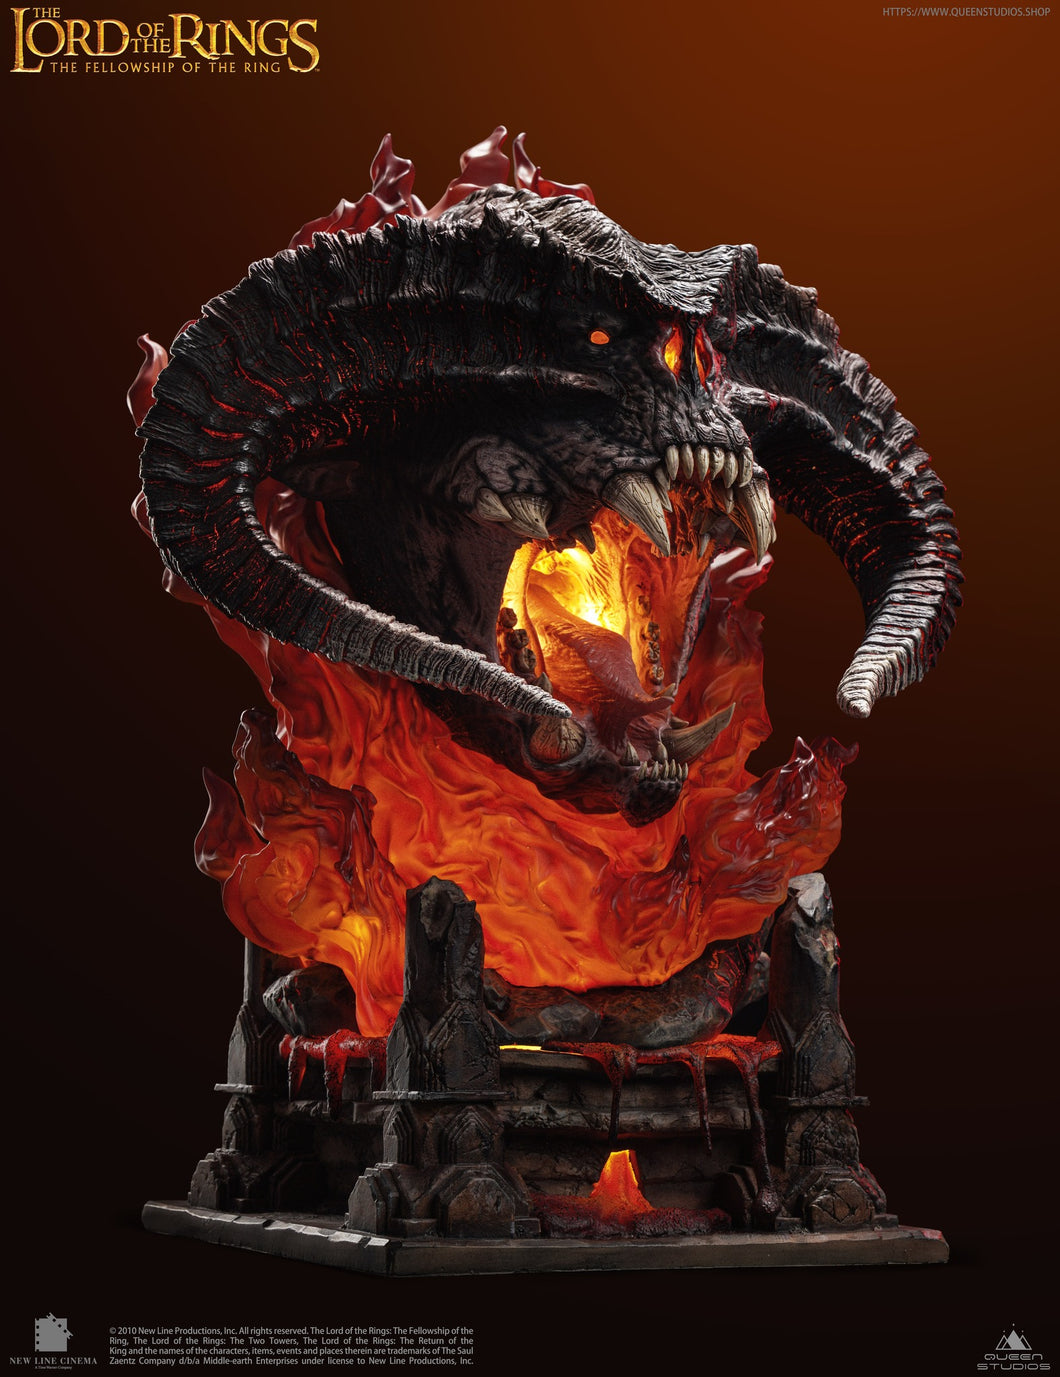 PRE-ORDER: BALROG BUST SMALL VERSION